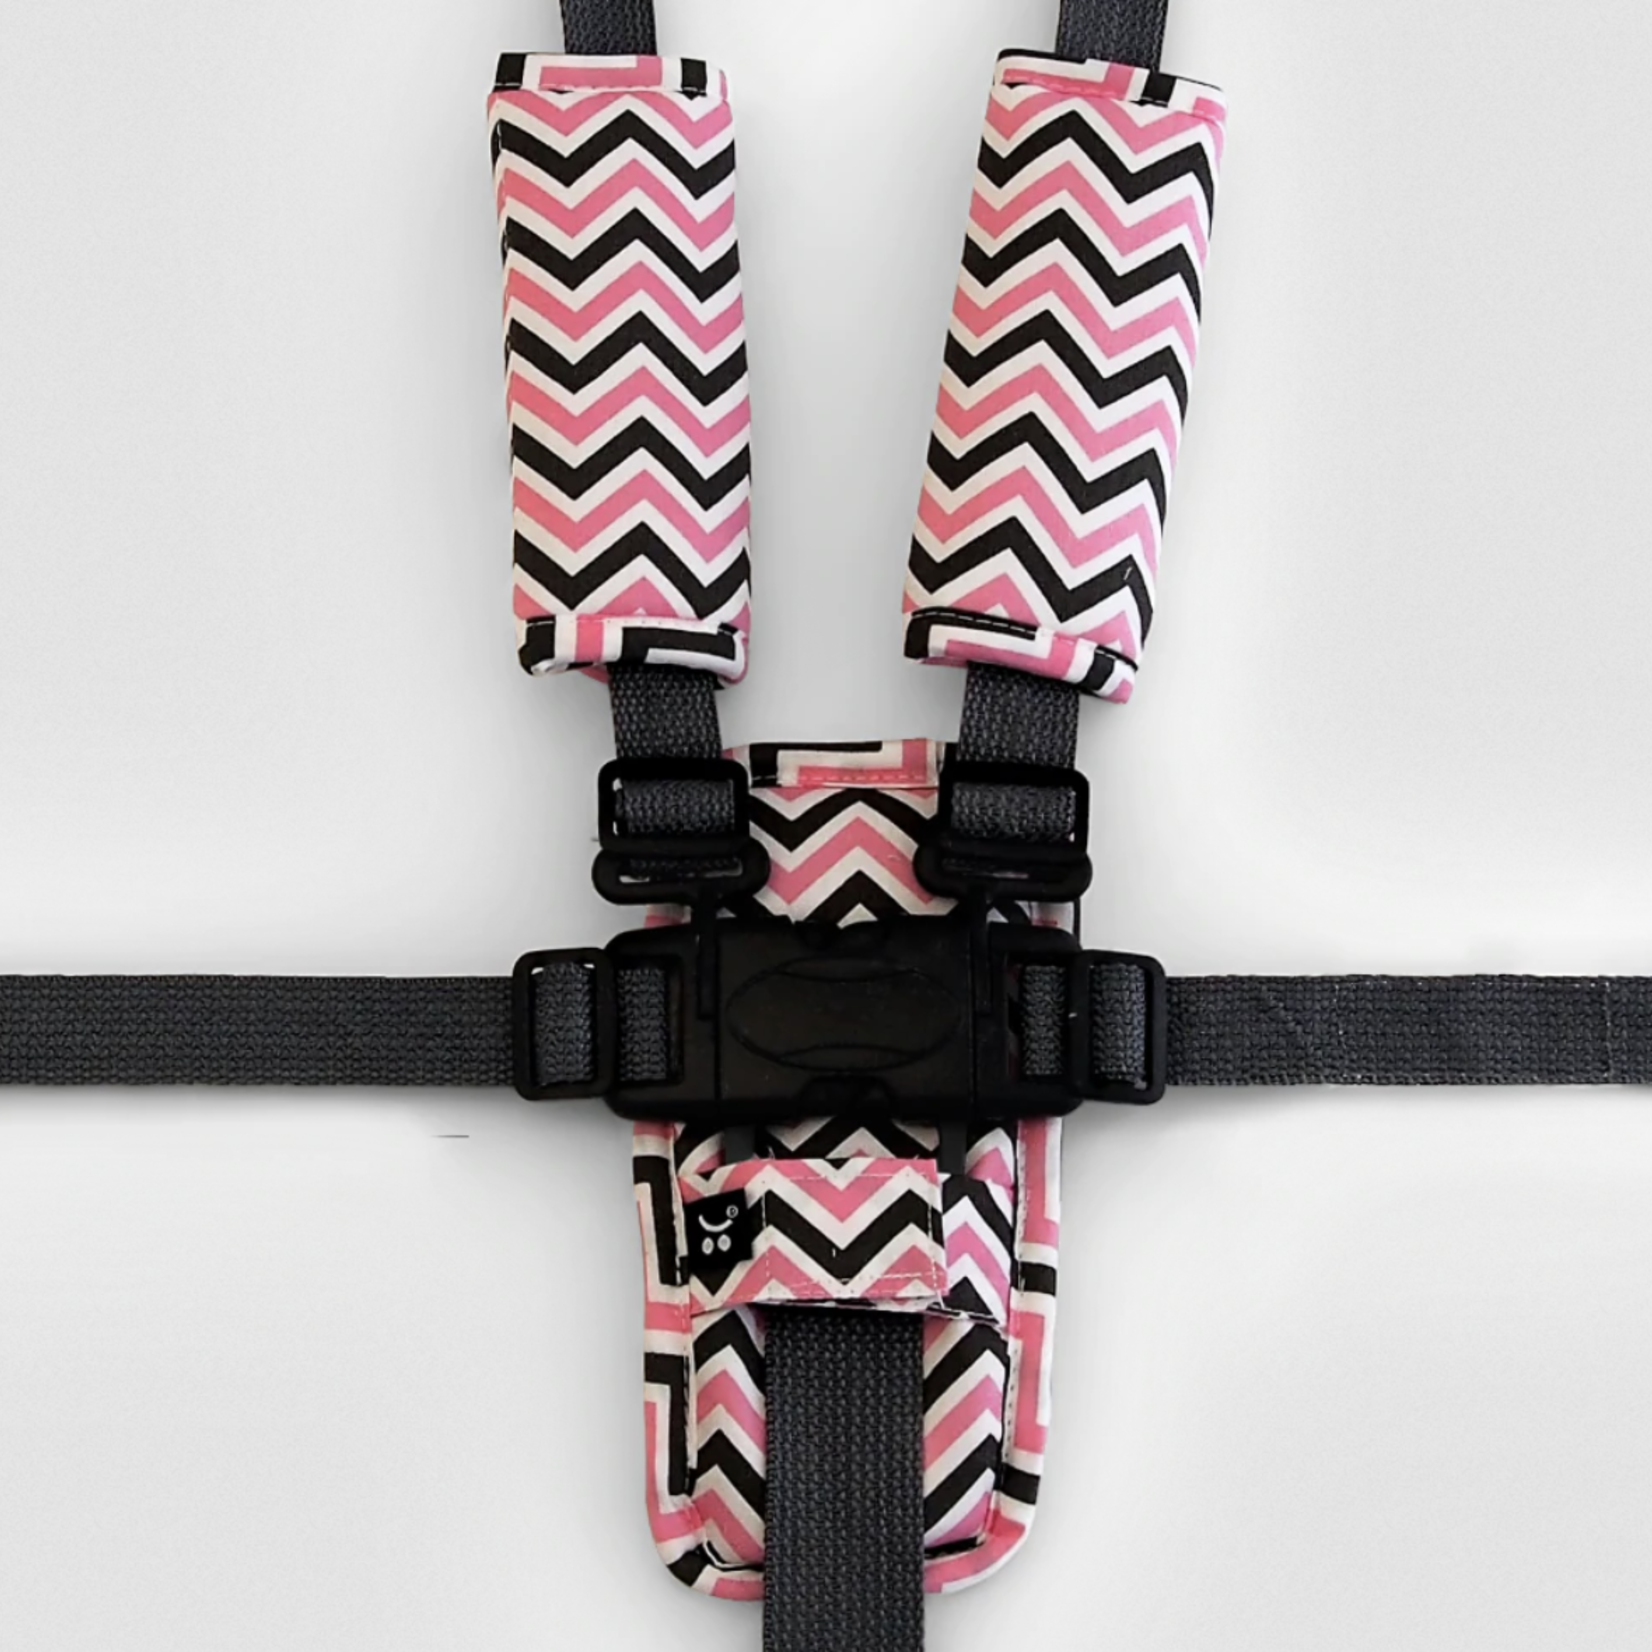 Outlookbaby 3 Piece Harness Cover Set-Charcoal Pink Chevron